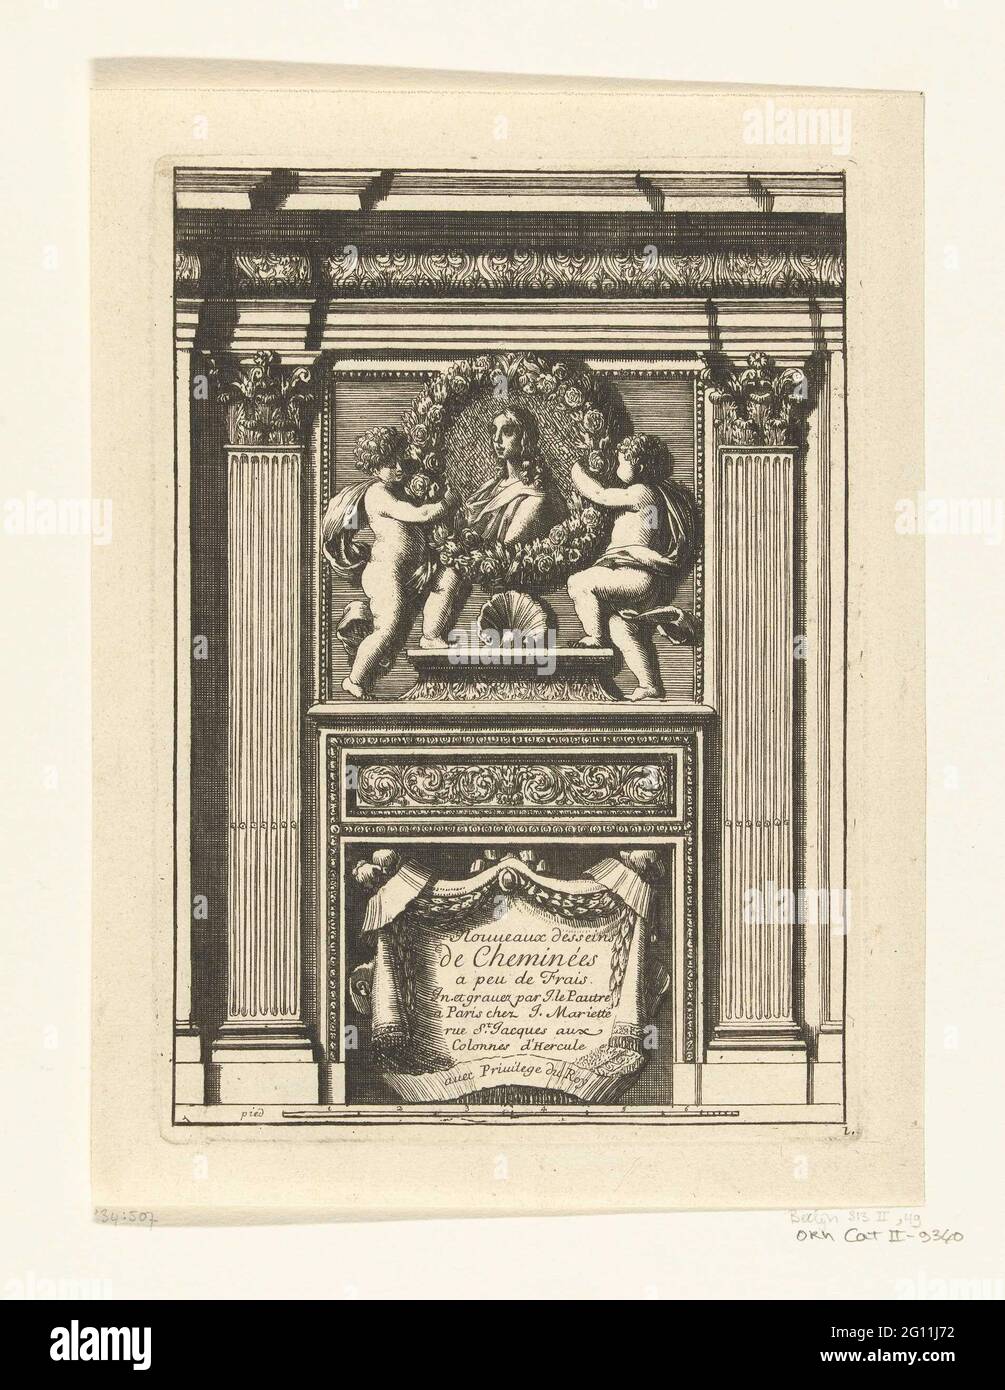 Title page: Nouueaux disseers de cheminées a peu de frais; Nouueaux Dessseins the Cheminées A Peu de Frais. Underbouble. On the Architraaf is a pedestal with two putti that gain a flower wreath with the portrait of a young man in it. From second edition. Stock Photo